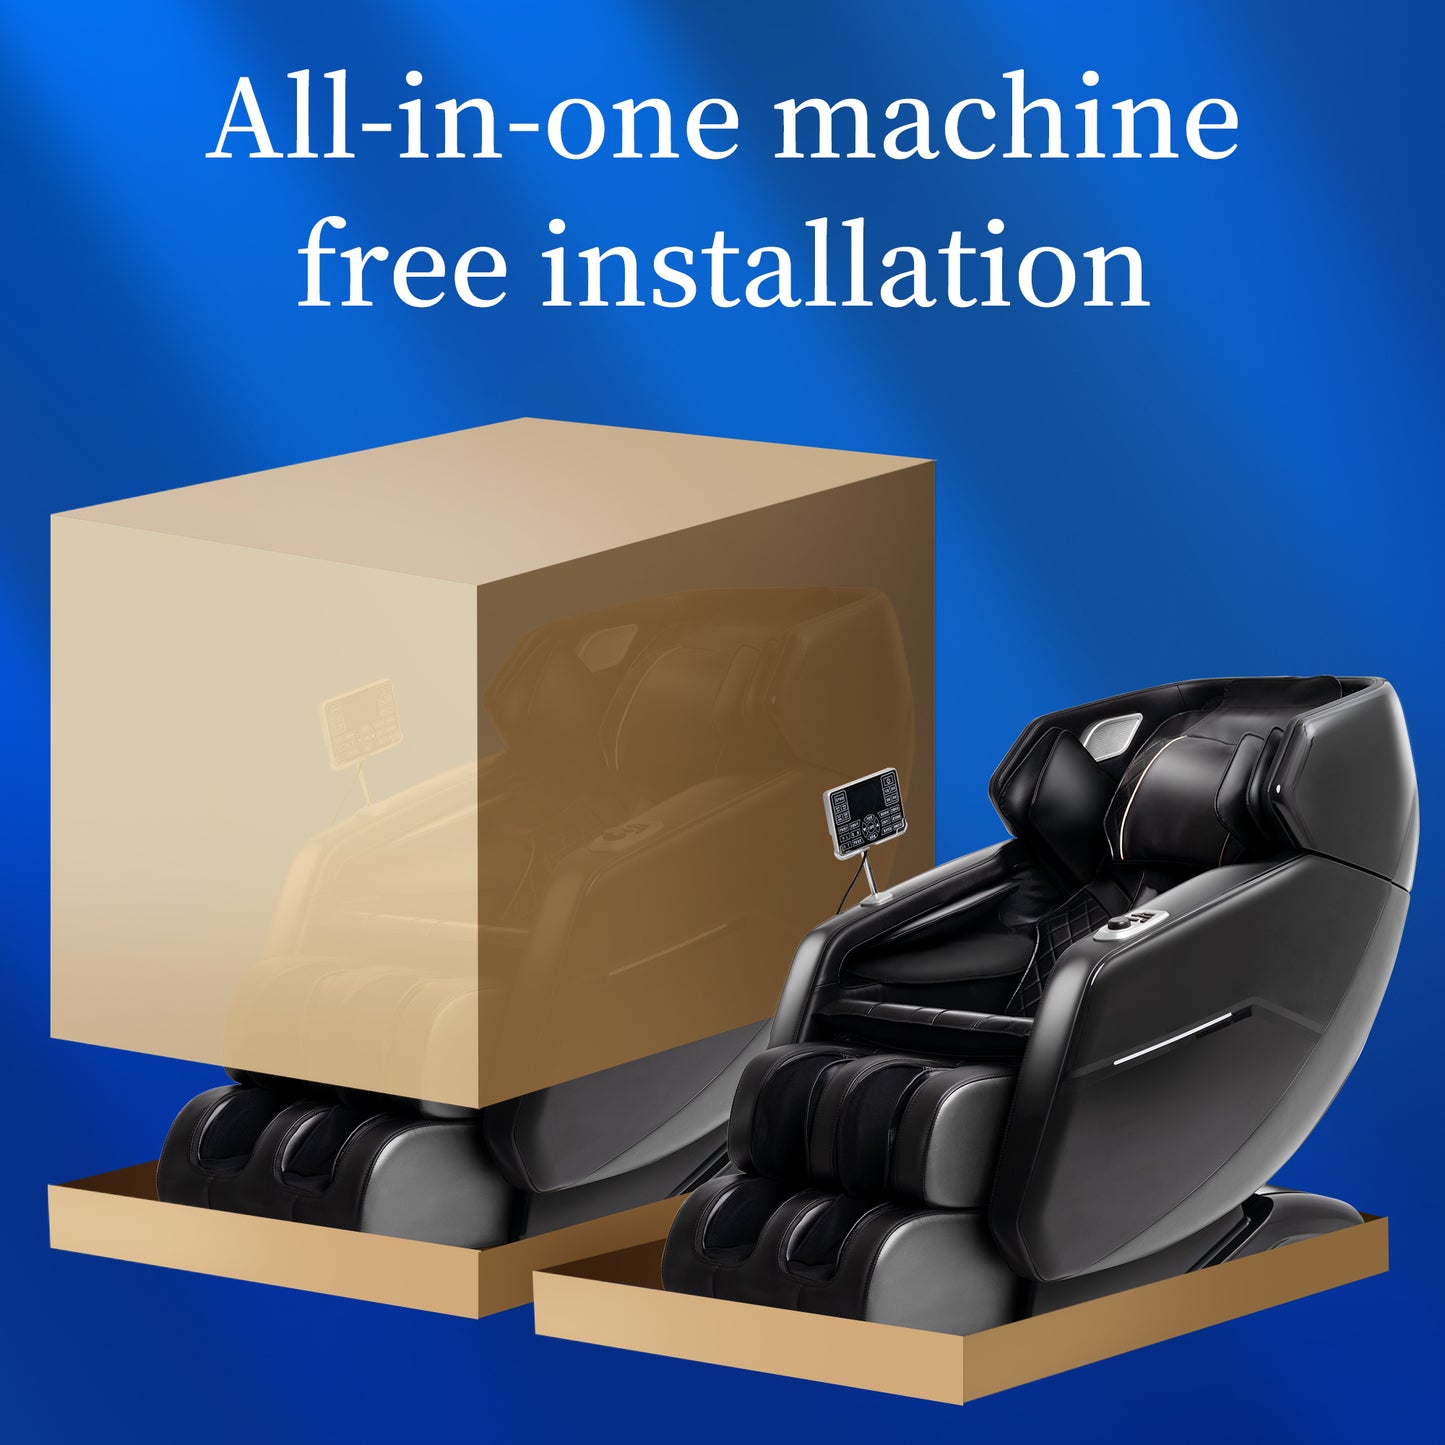 3D Full Body Massage Chair with Thai Stretch Zero Gravity and Bluetooth